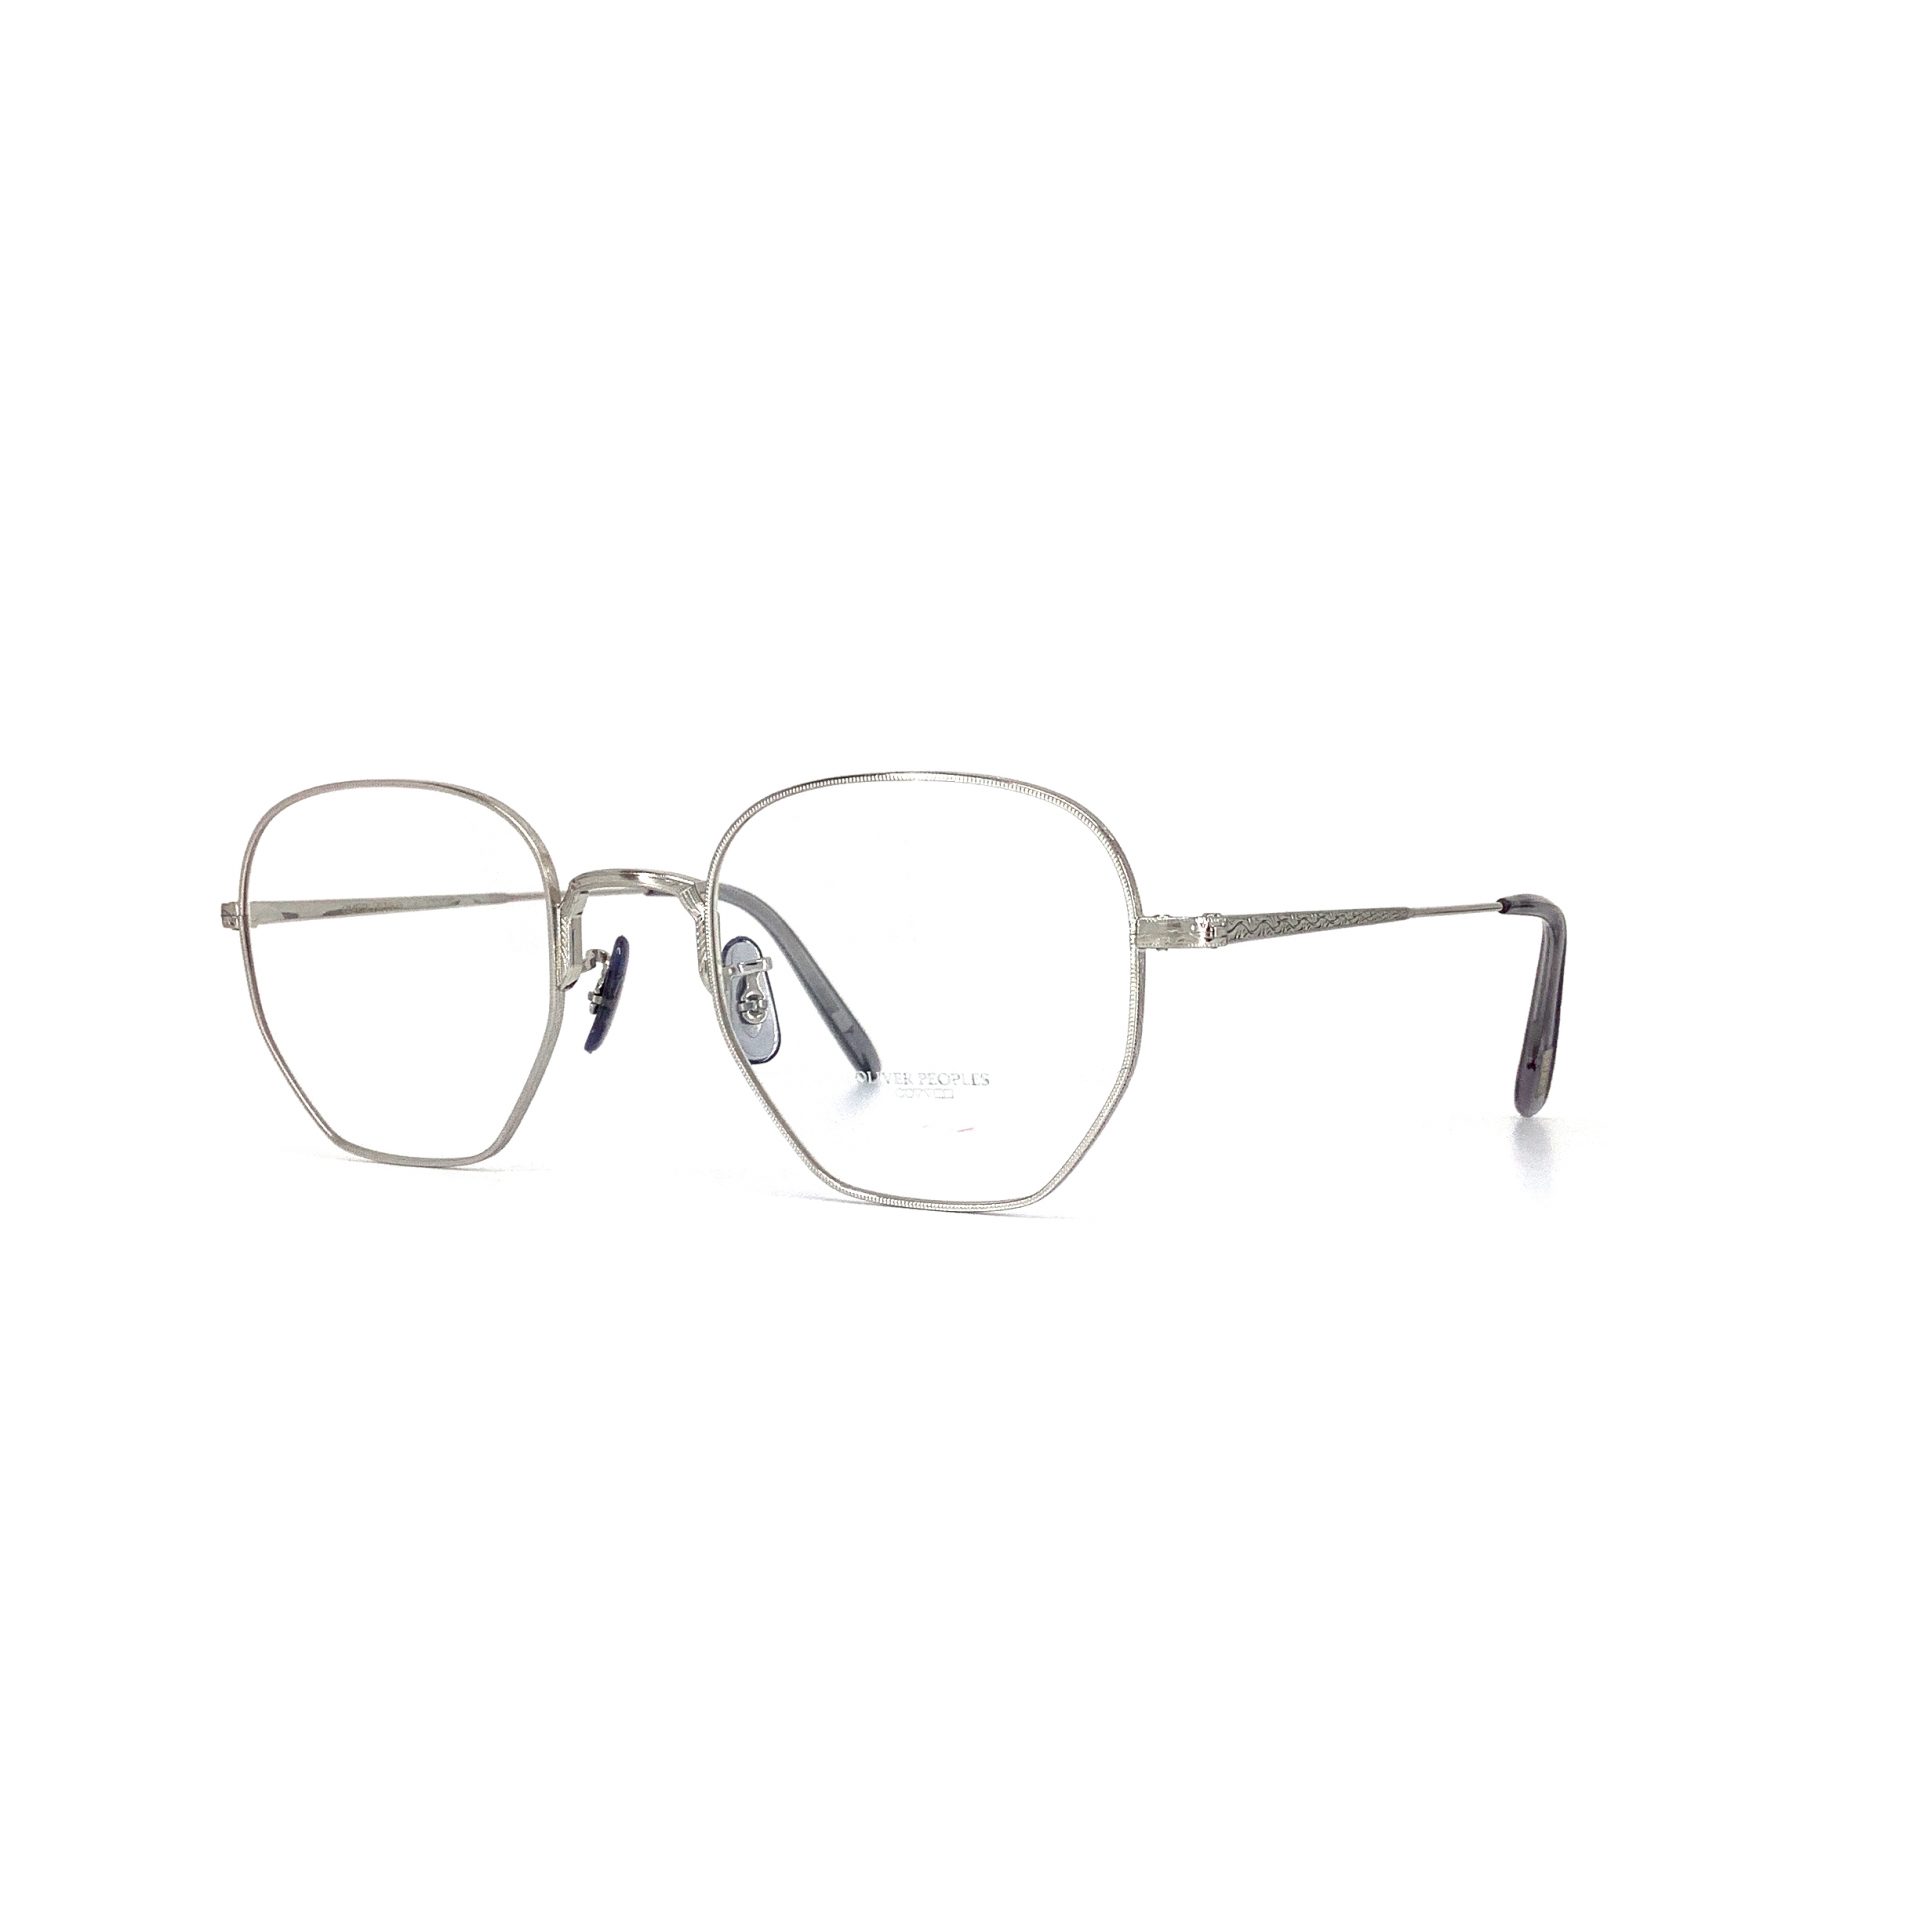 OLIVER PEOPLES/OP-40/1234/5063/46 - THEye Optical